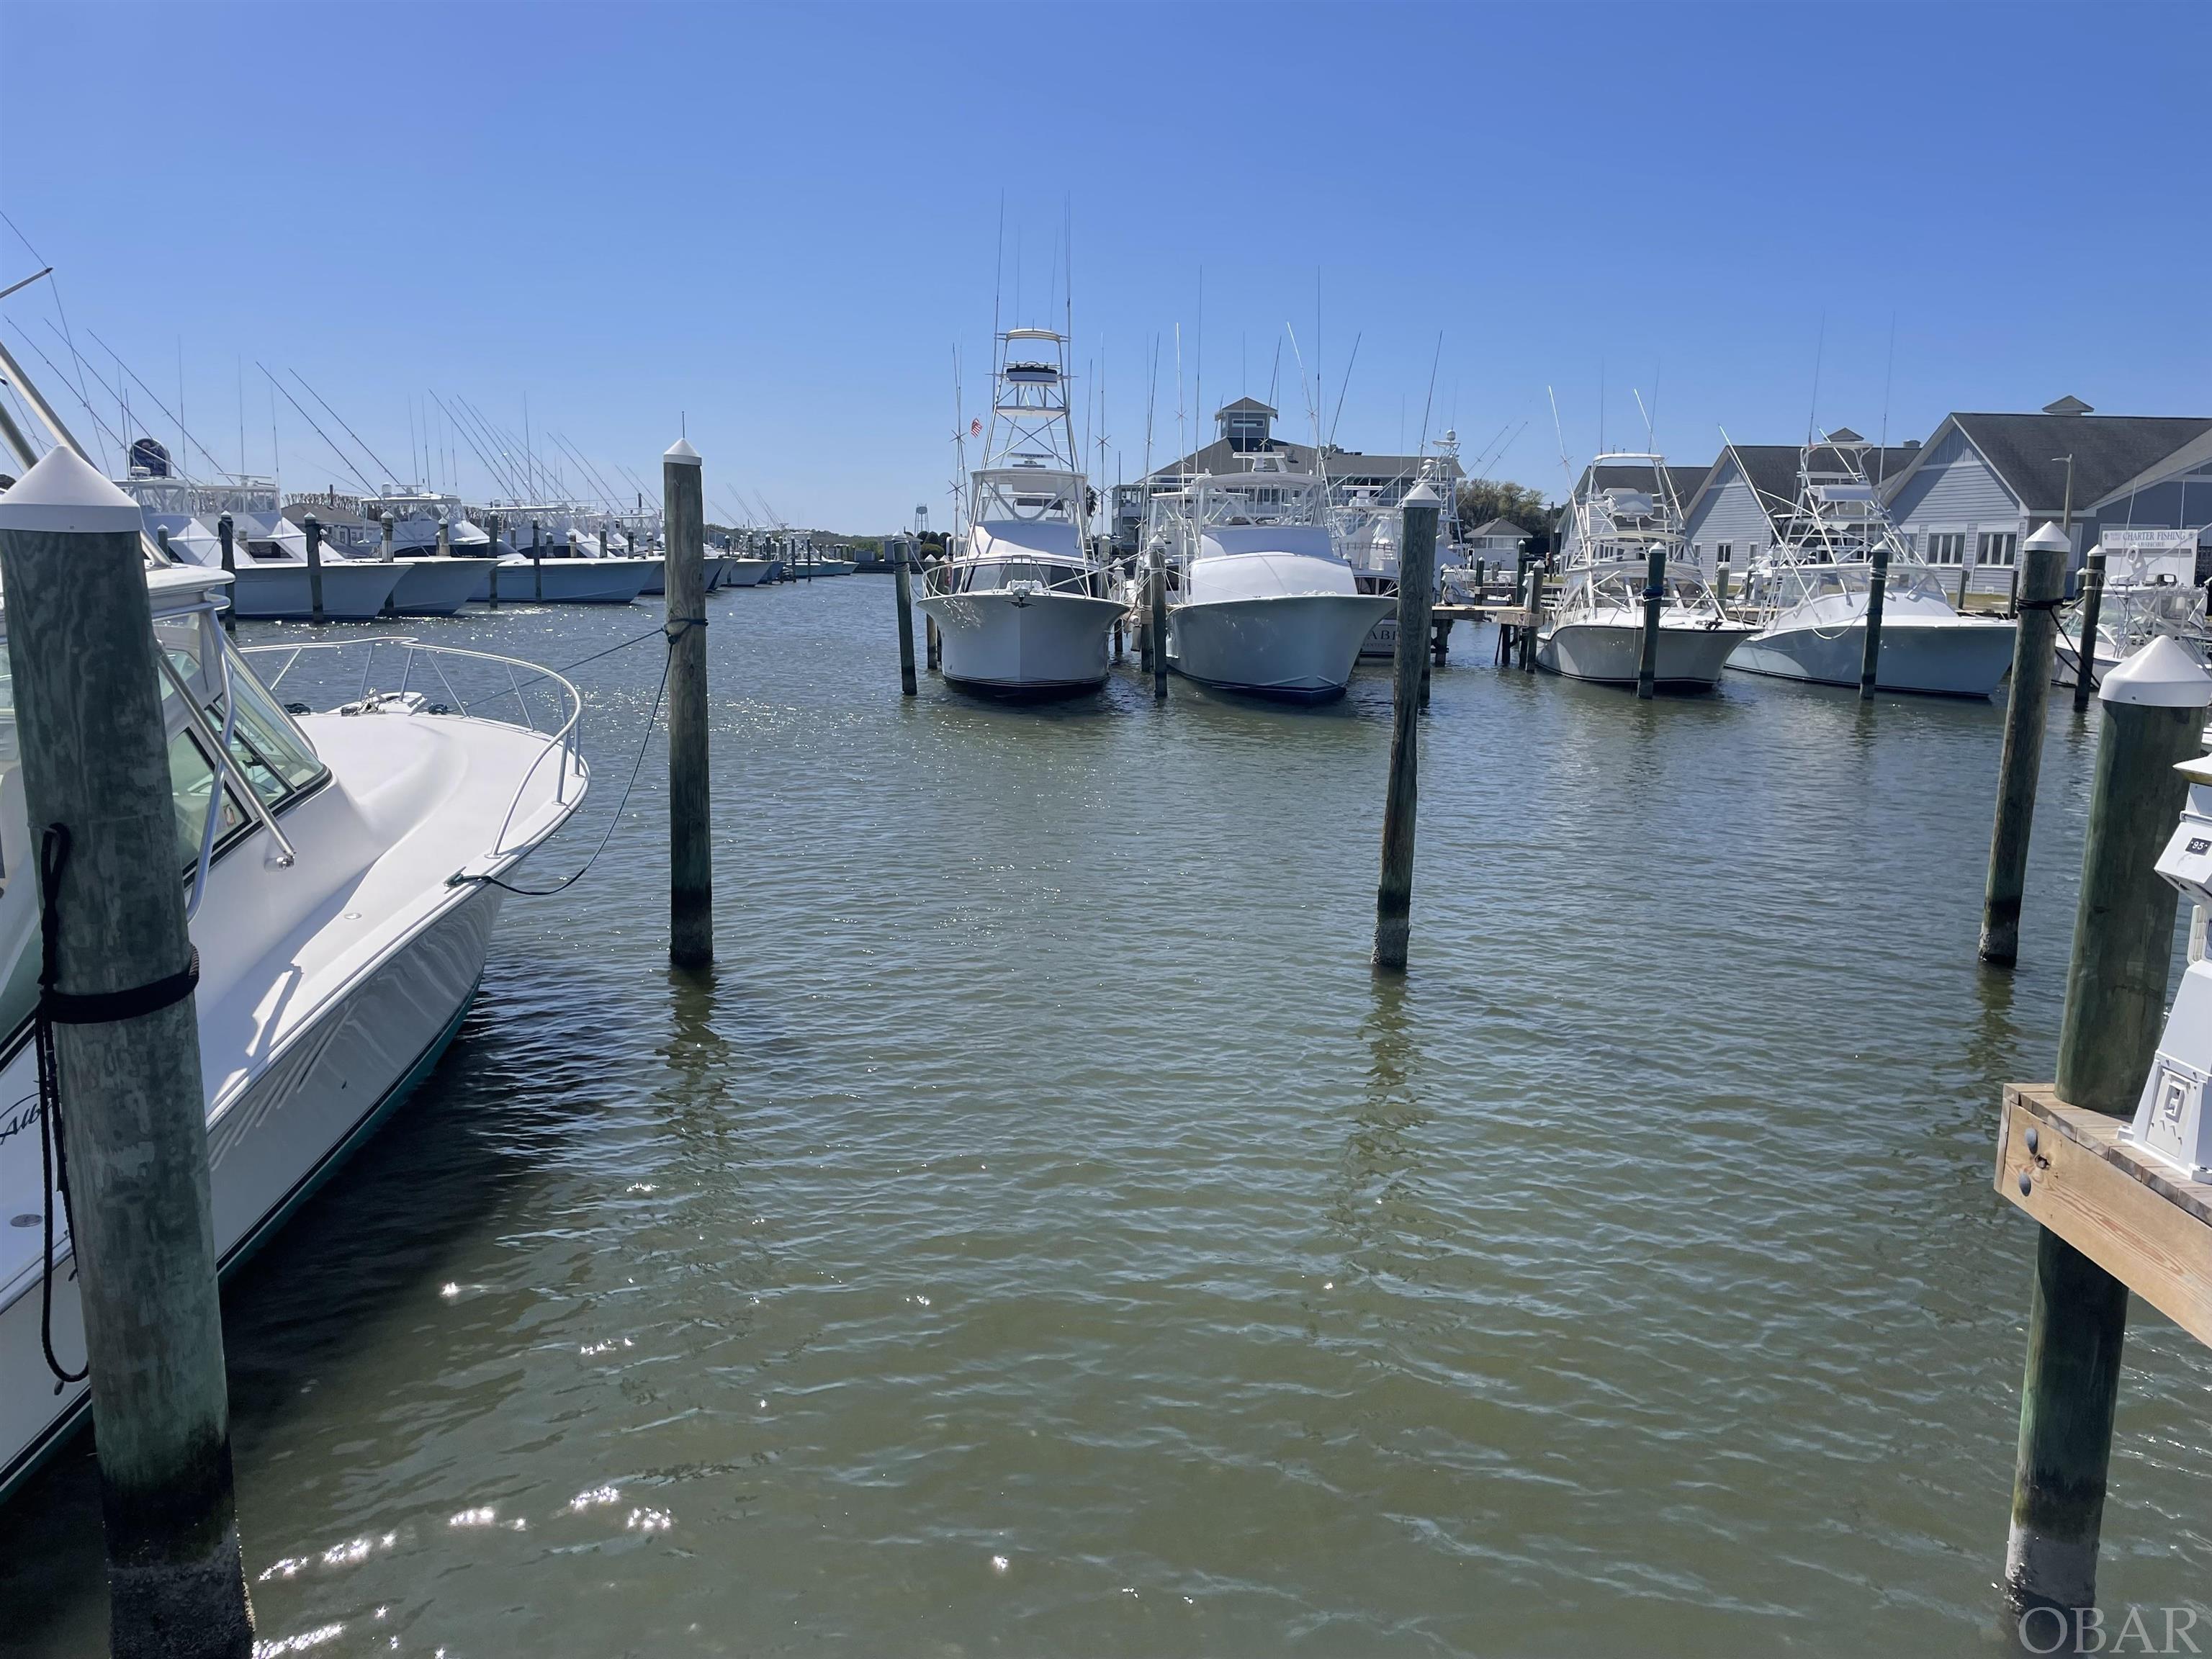 45 x 17 boat slip on B-Dock in Pirate's Cove Marina.  Central location close to parking, fish cleaning station, Ship's store, Bluewater Bar and Grill and Mimi's Tiki Hut. Pirate's Cove marina offers in slip diesel fueling, fuel dock for non-ethanol gas, a bath house with showers and ships store for provisions, gifts and Pirate's Cove merchandise.